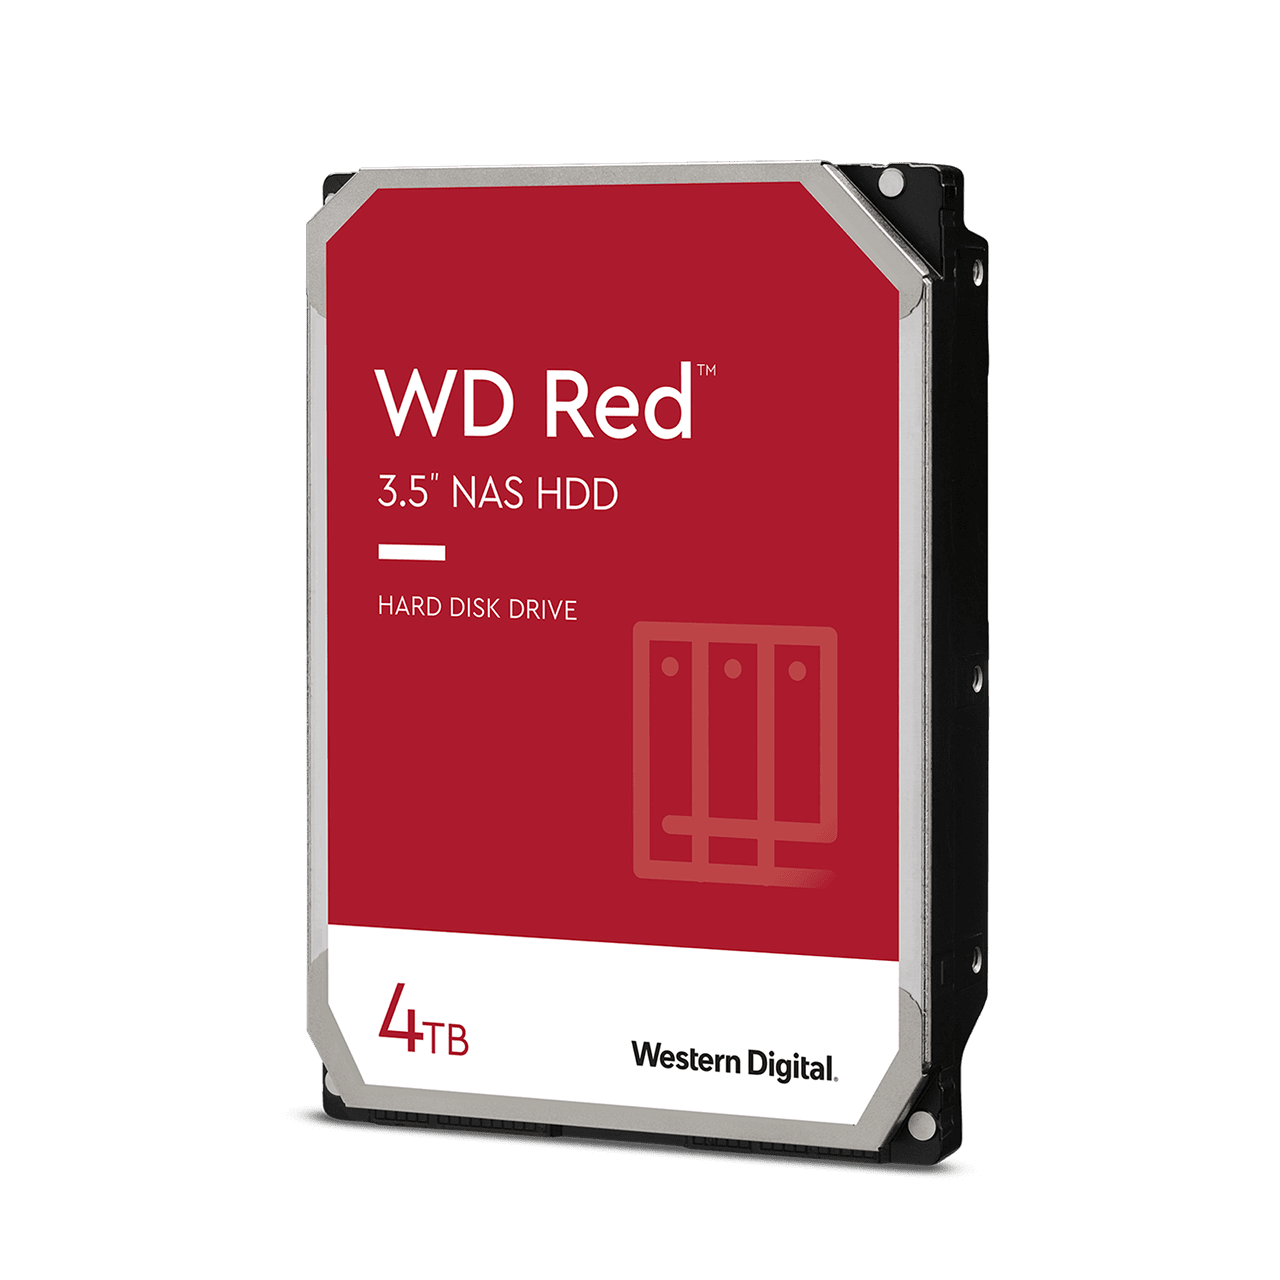 WD Red 4TB - Image3